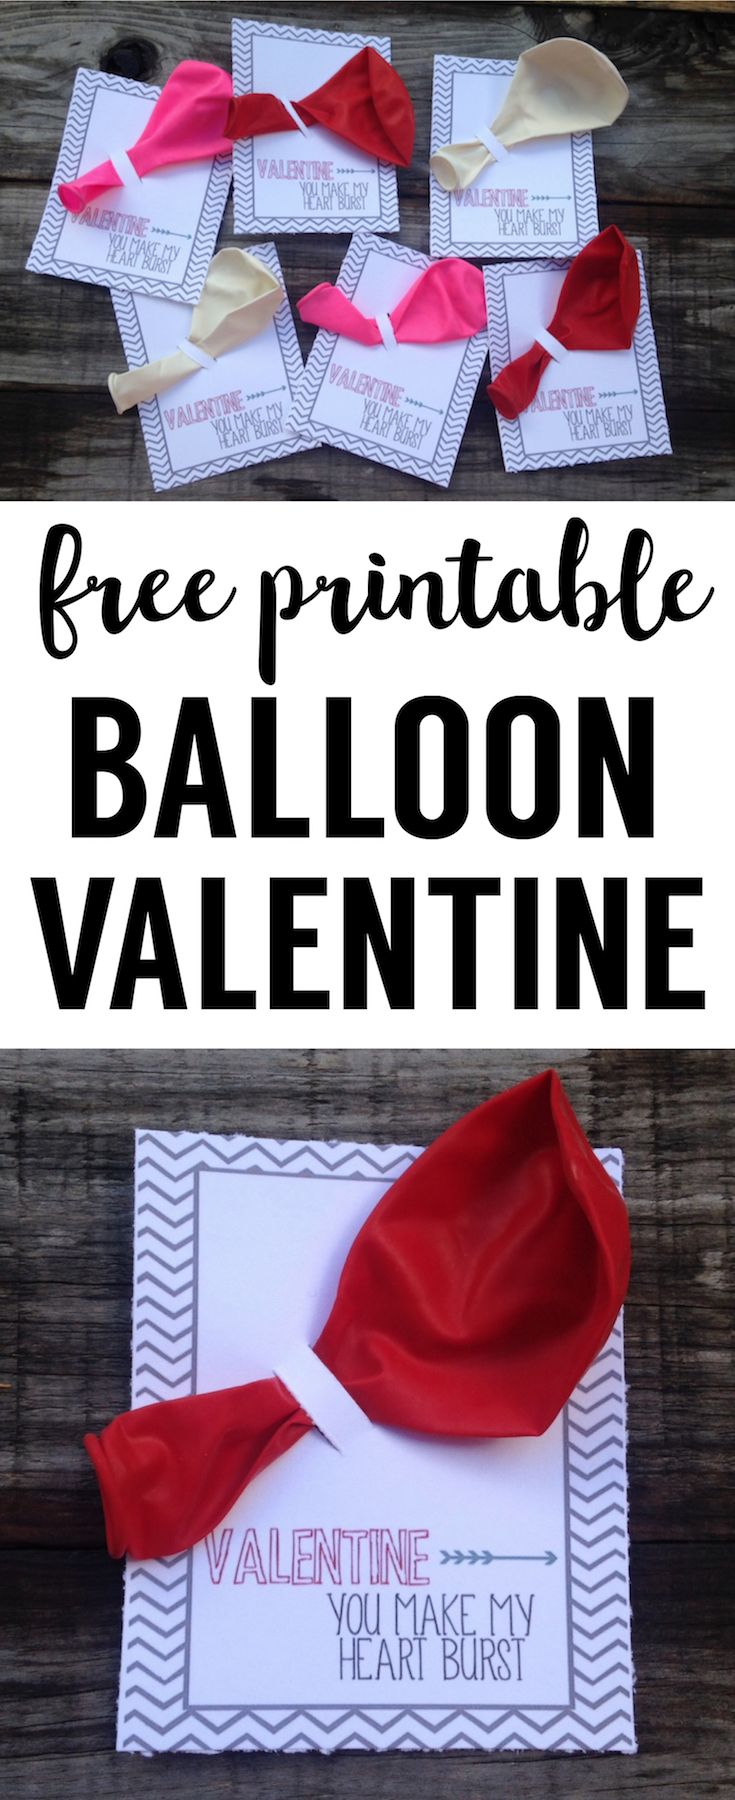 Balloon Valentine Printable DIY Valentine for school valentine exchanges. Easy Valentine idea for kids valentine. They are even cuter with heart shaped balloons!